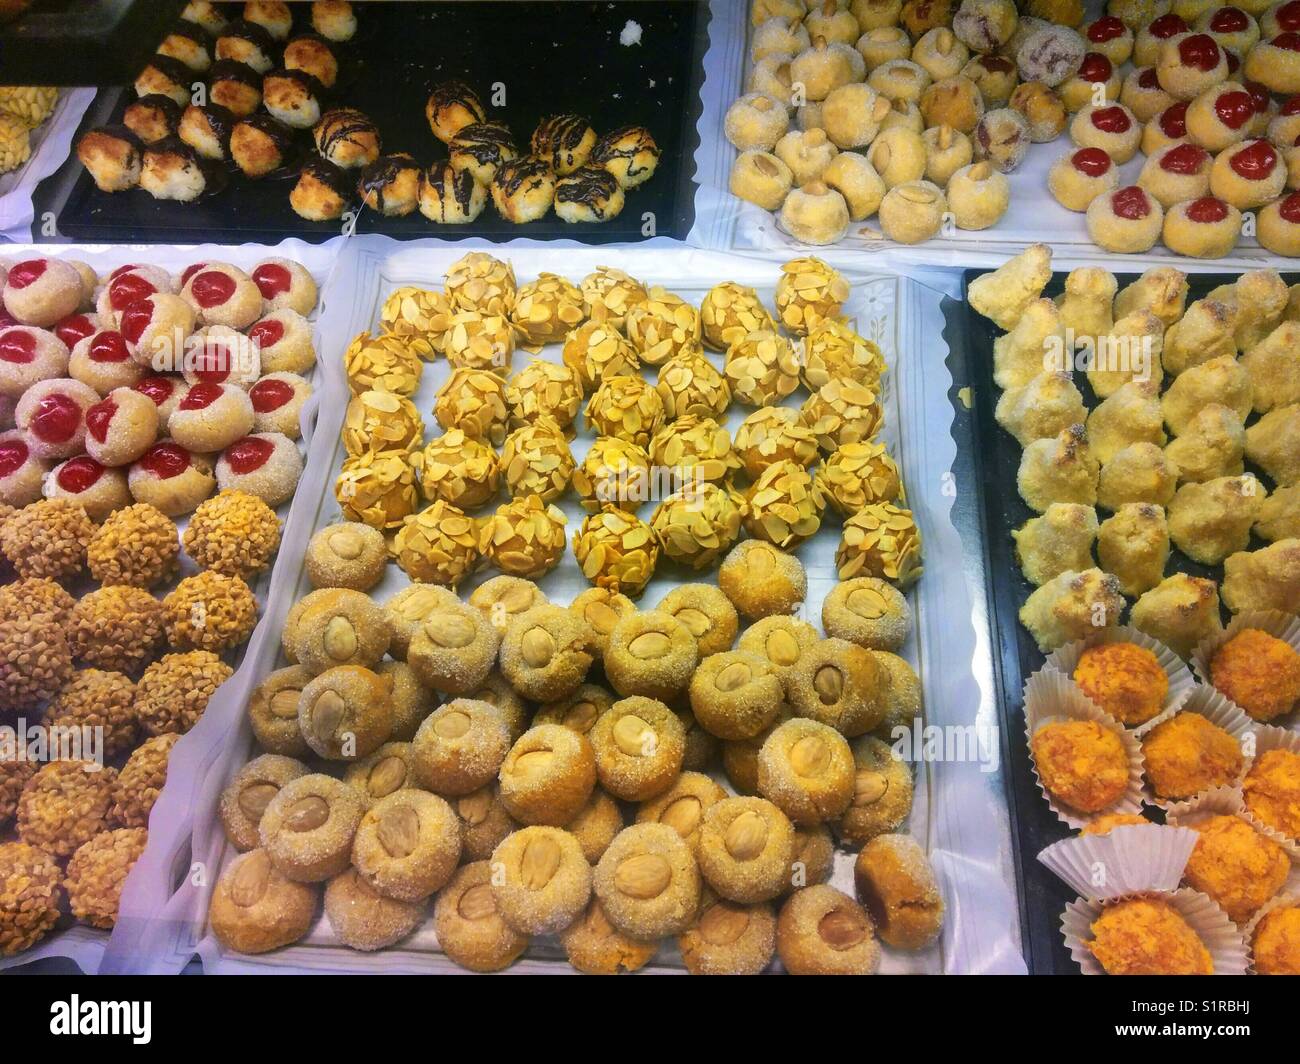 Panellets. Typical marzipan pastries in Catalonia, Spain. Stock Photo